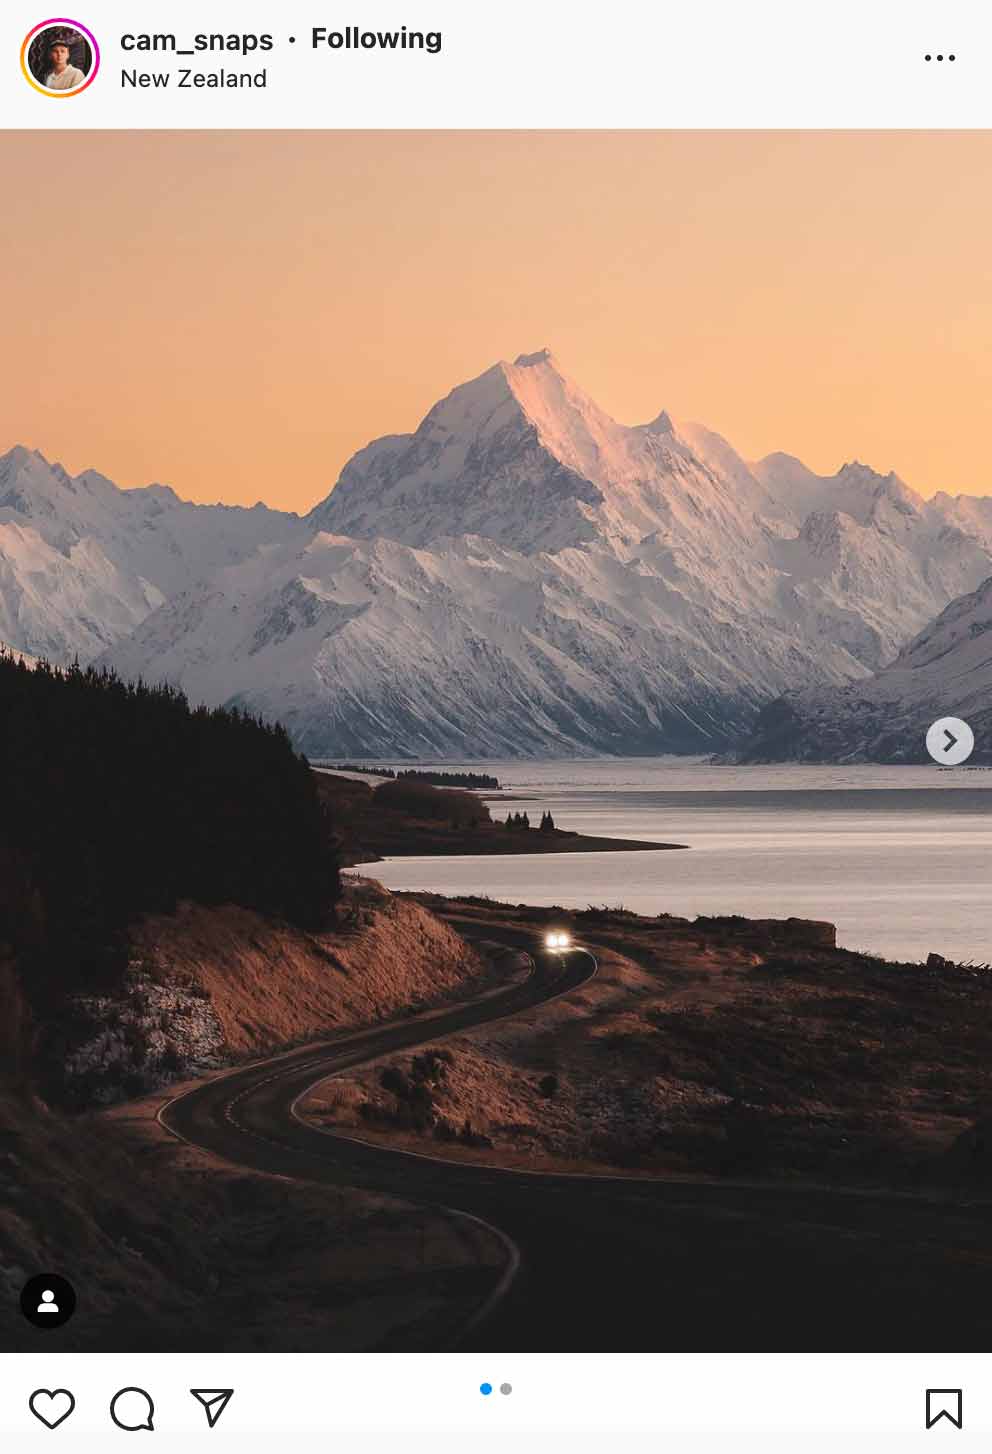 new zealand with snow mountains and car